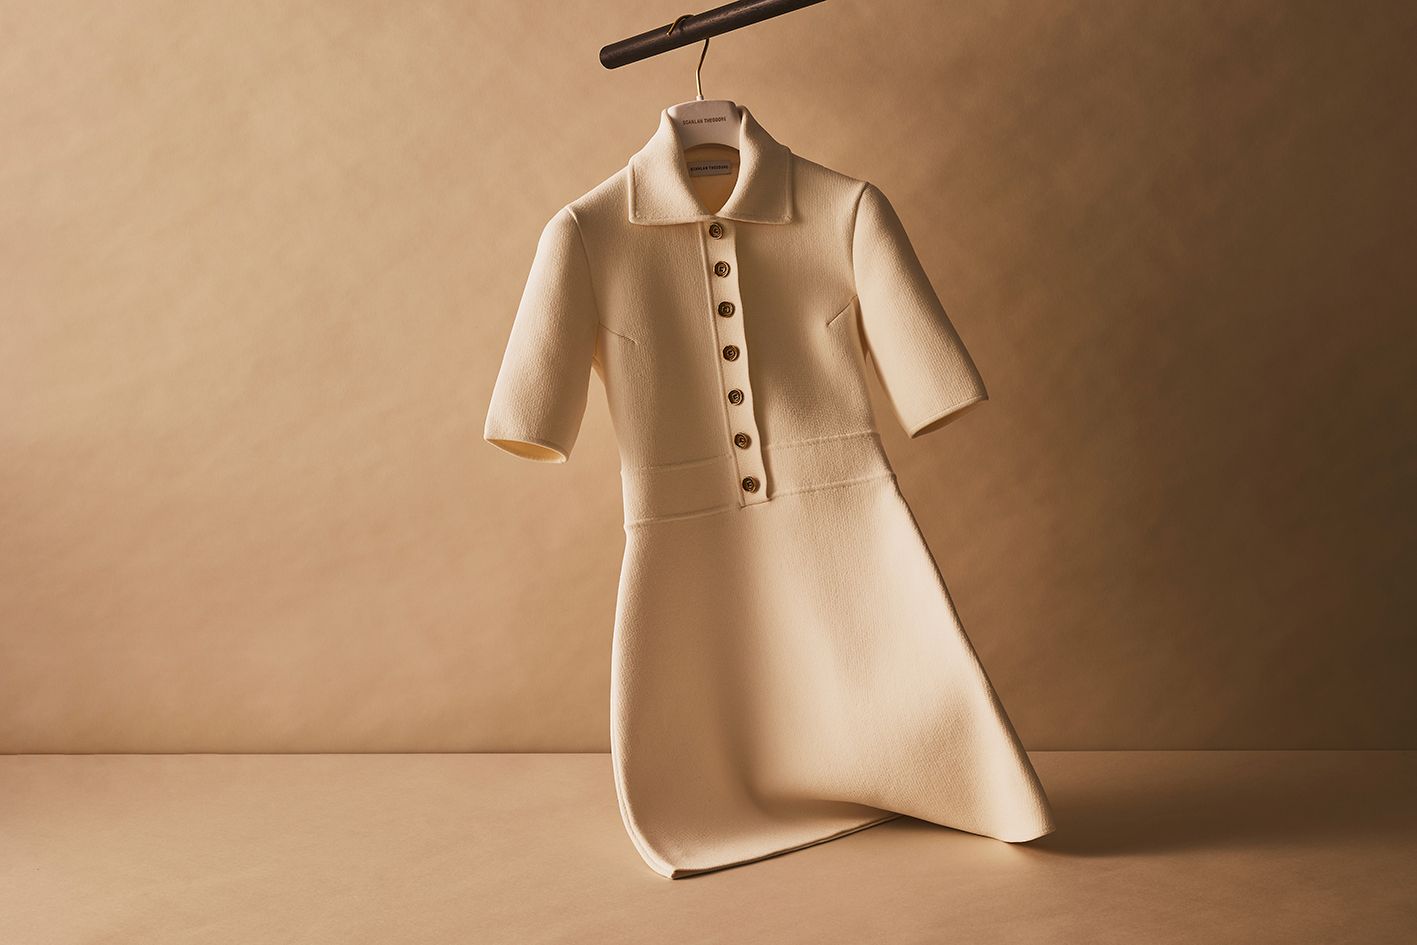 Scanlan Theodore cream crepe knit button dress with short sleeves hanging on a rail.